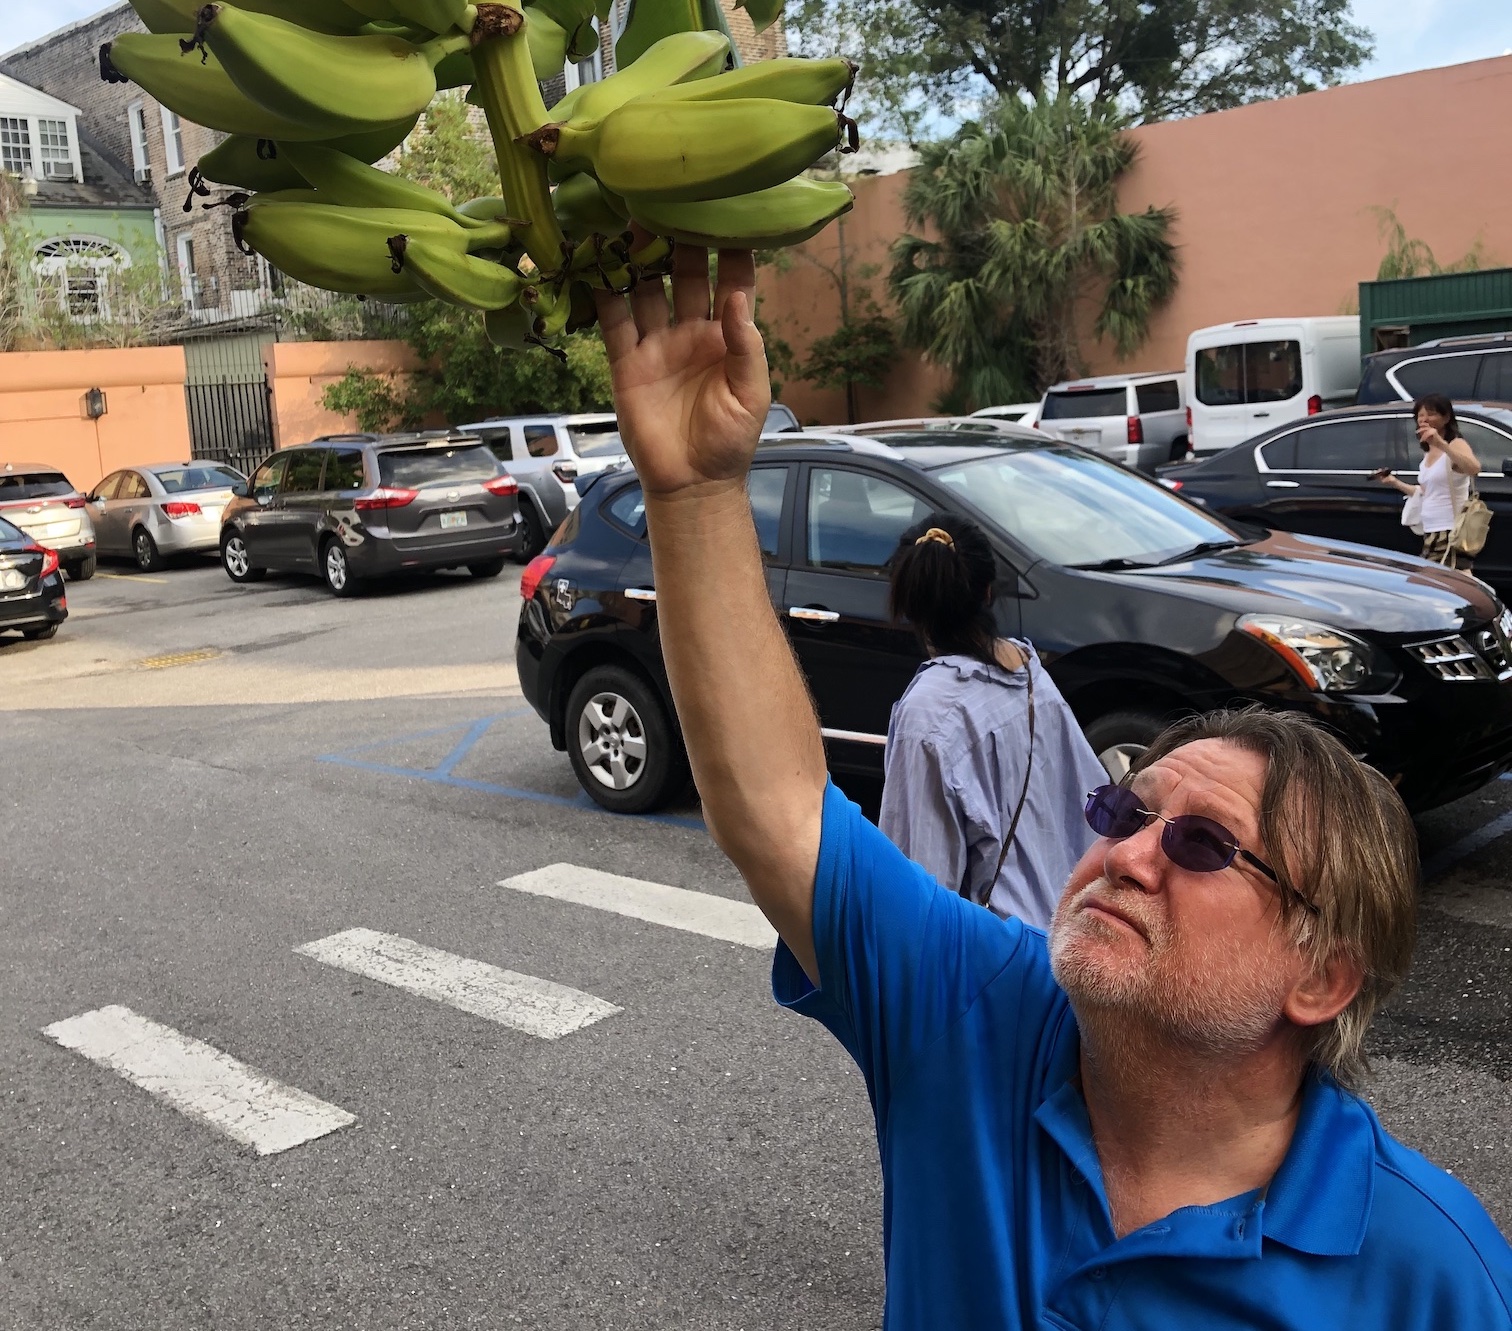 George reaching for plaintains